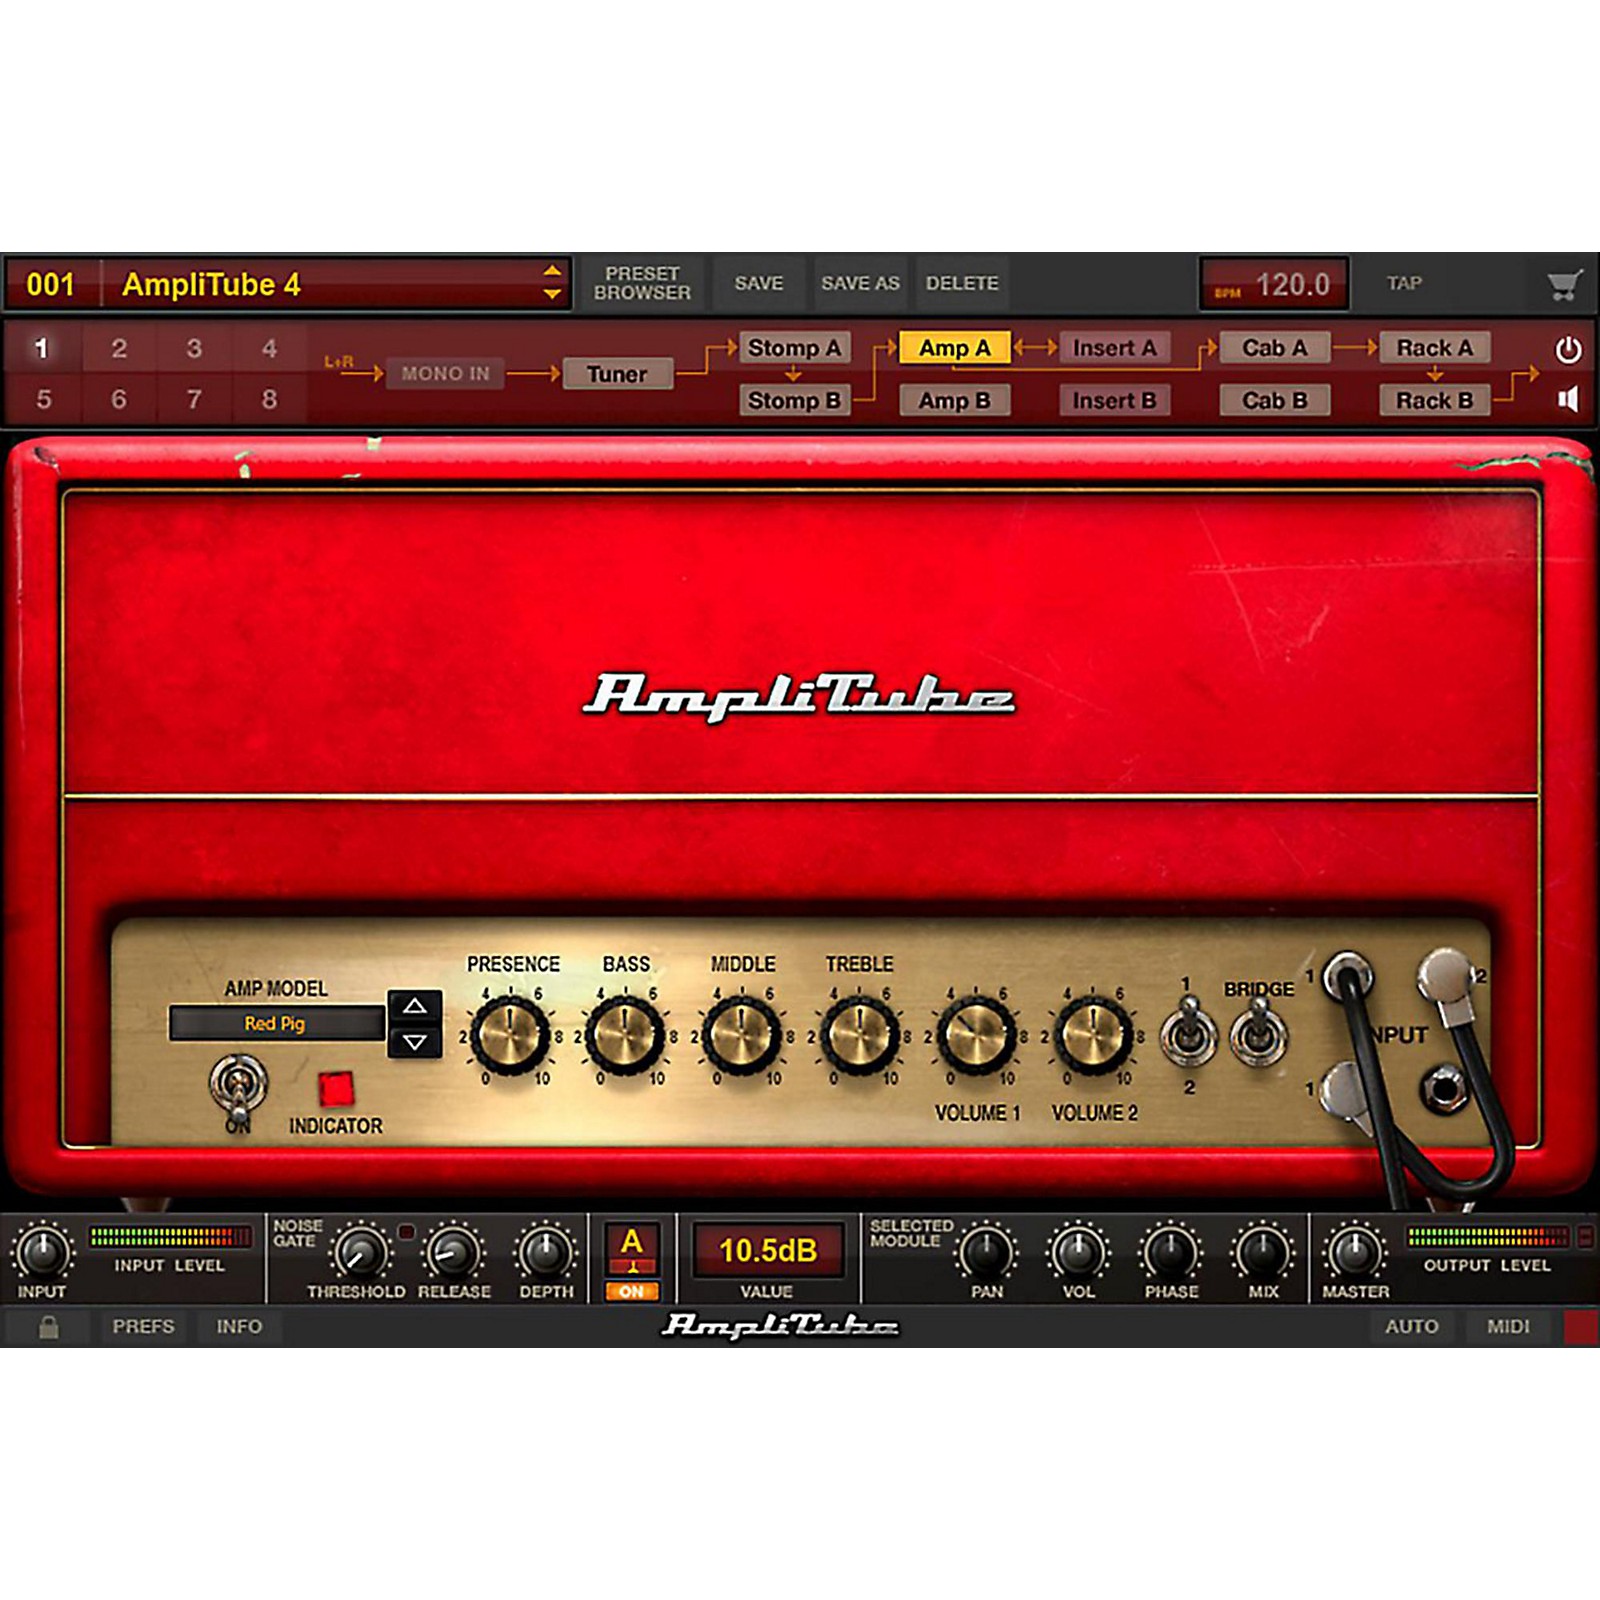 does amplitube fender require software